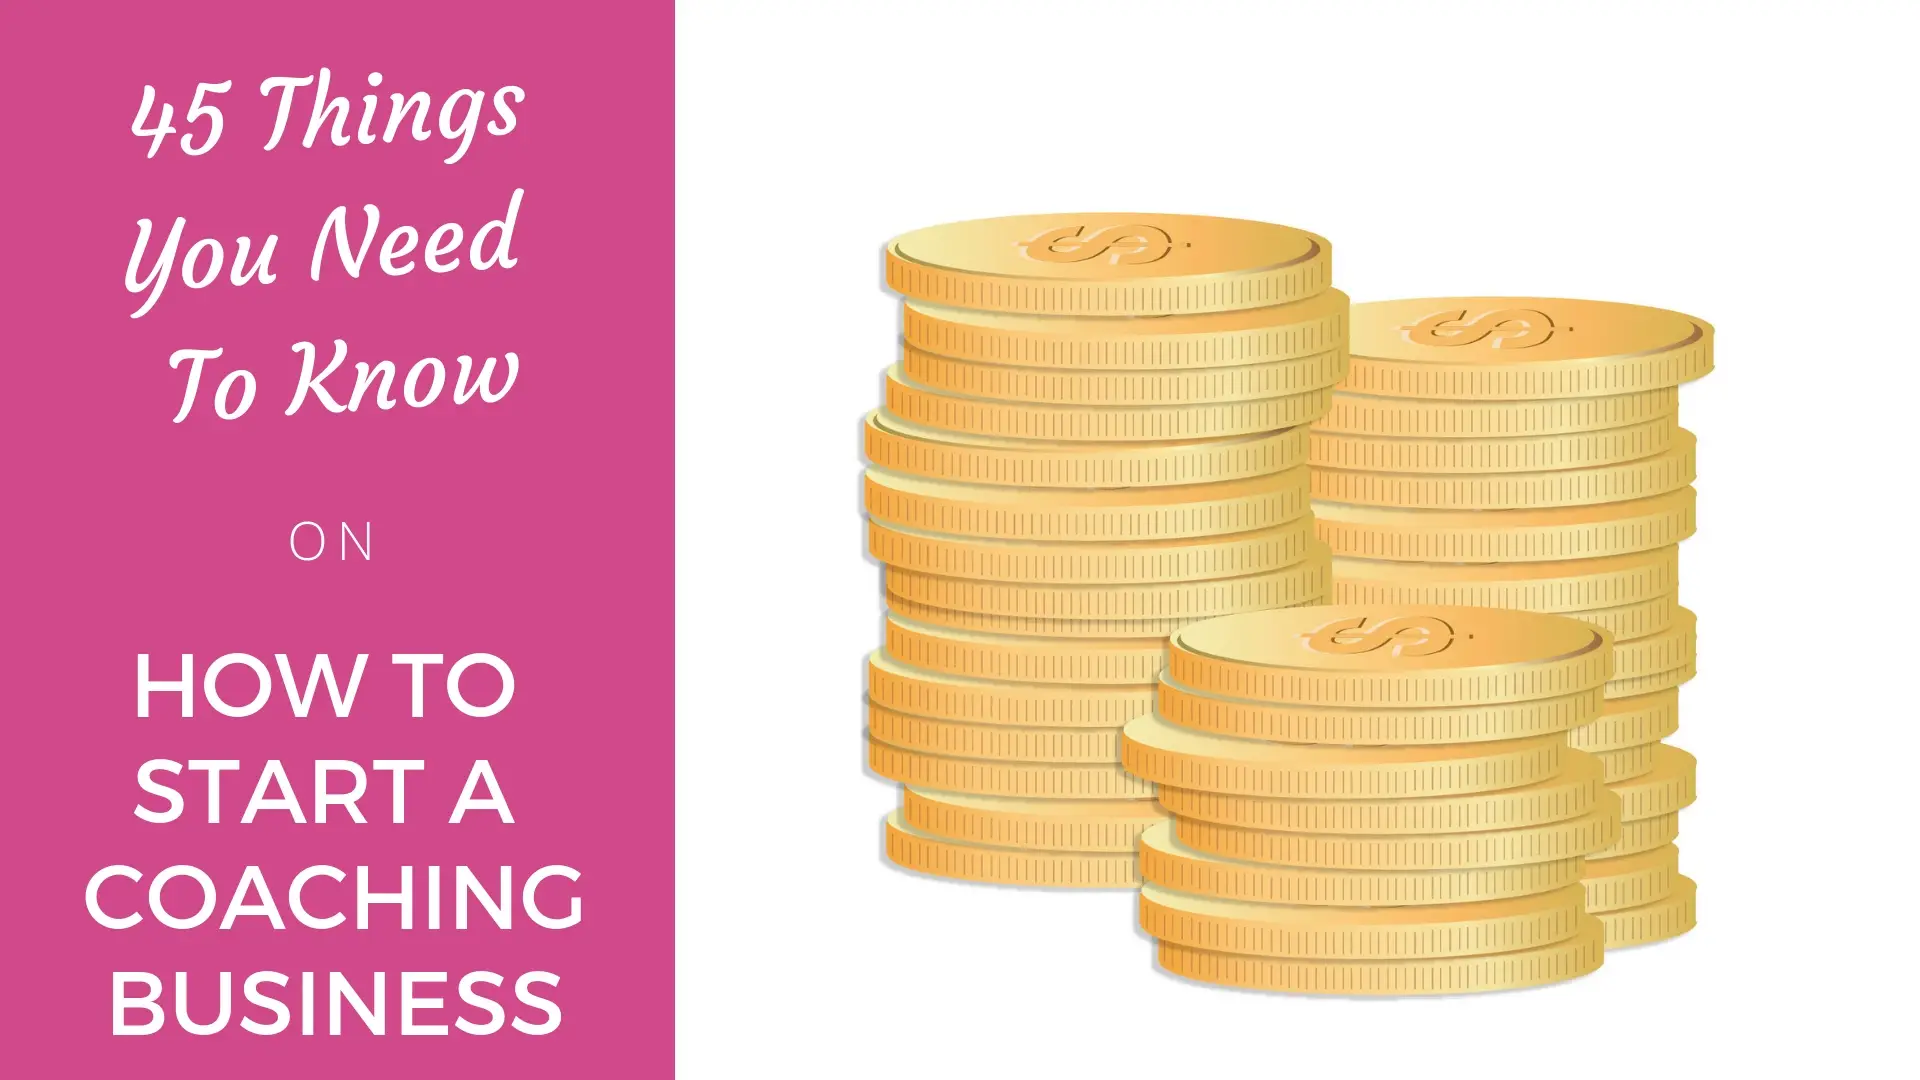 45 Things You Need To Know On How To Start A Coaching Business Start a coaching business